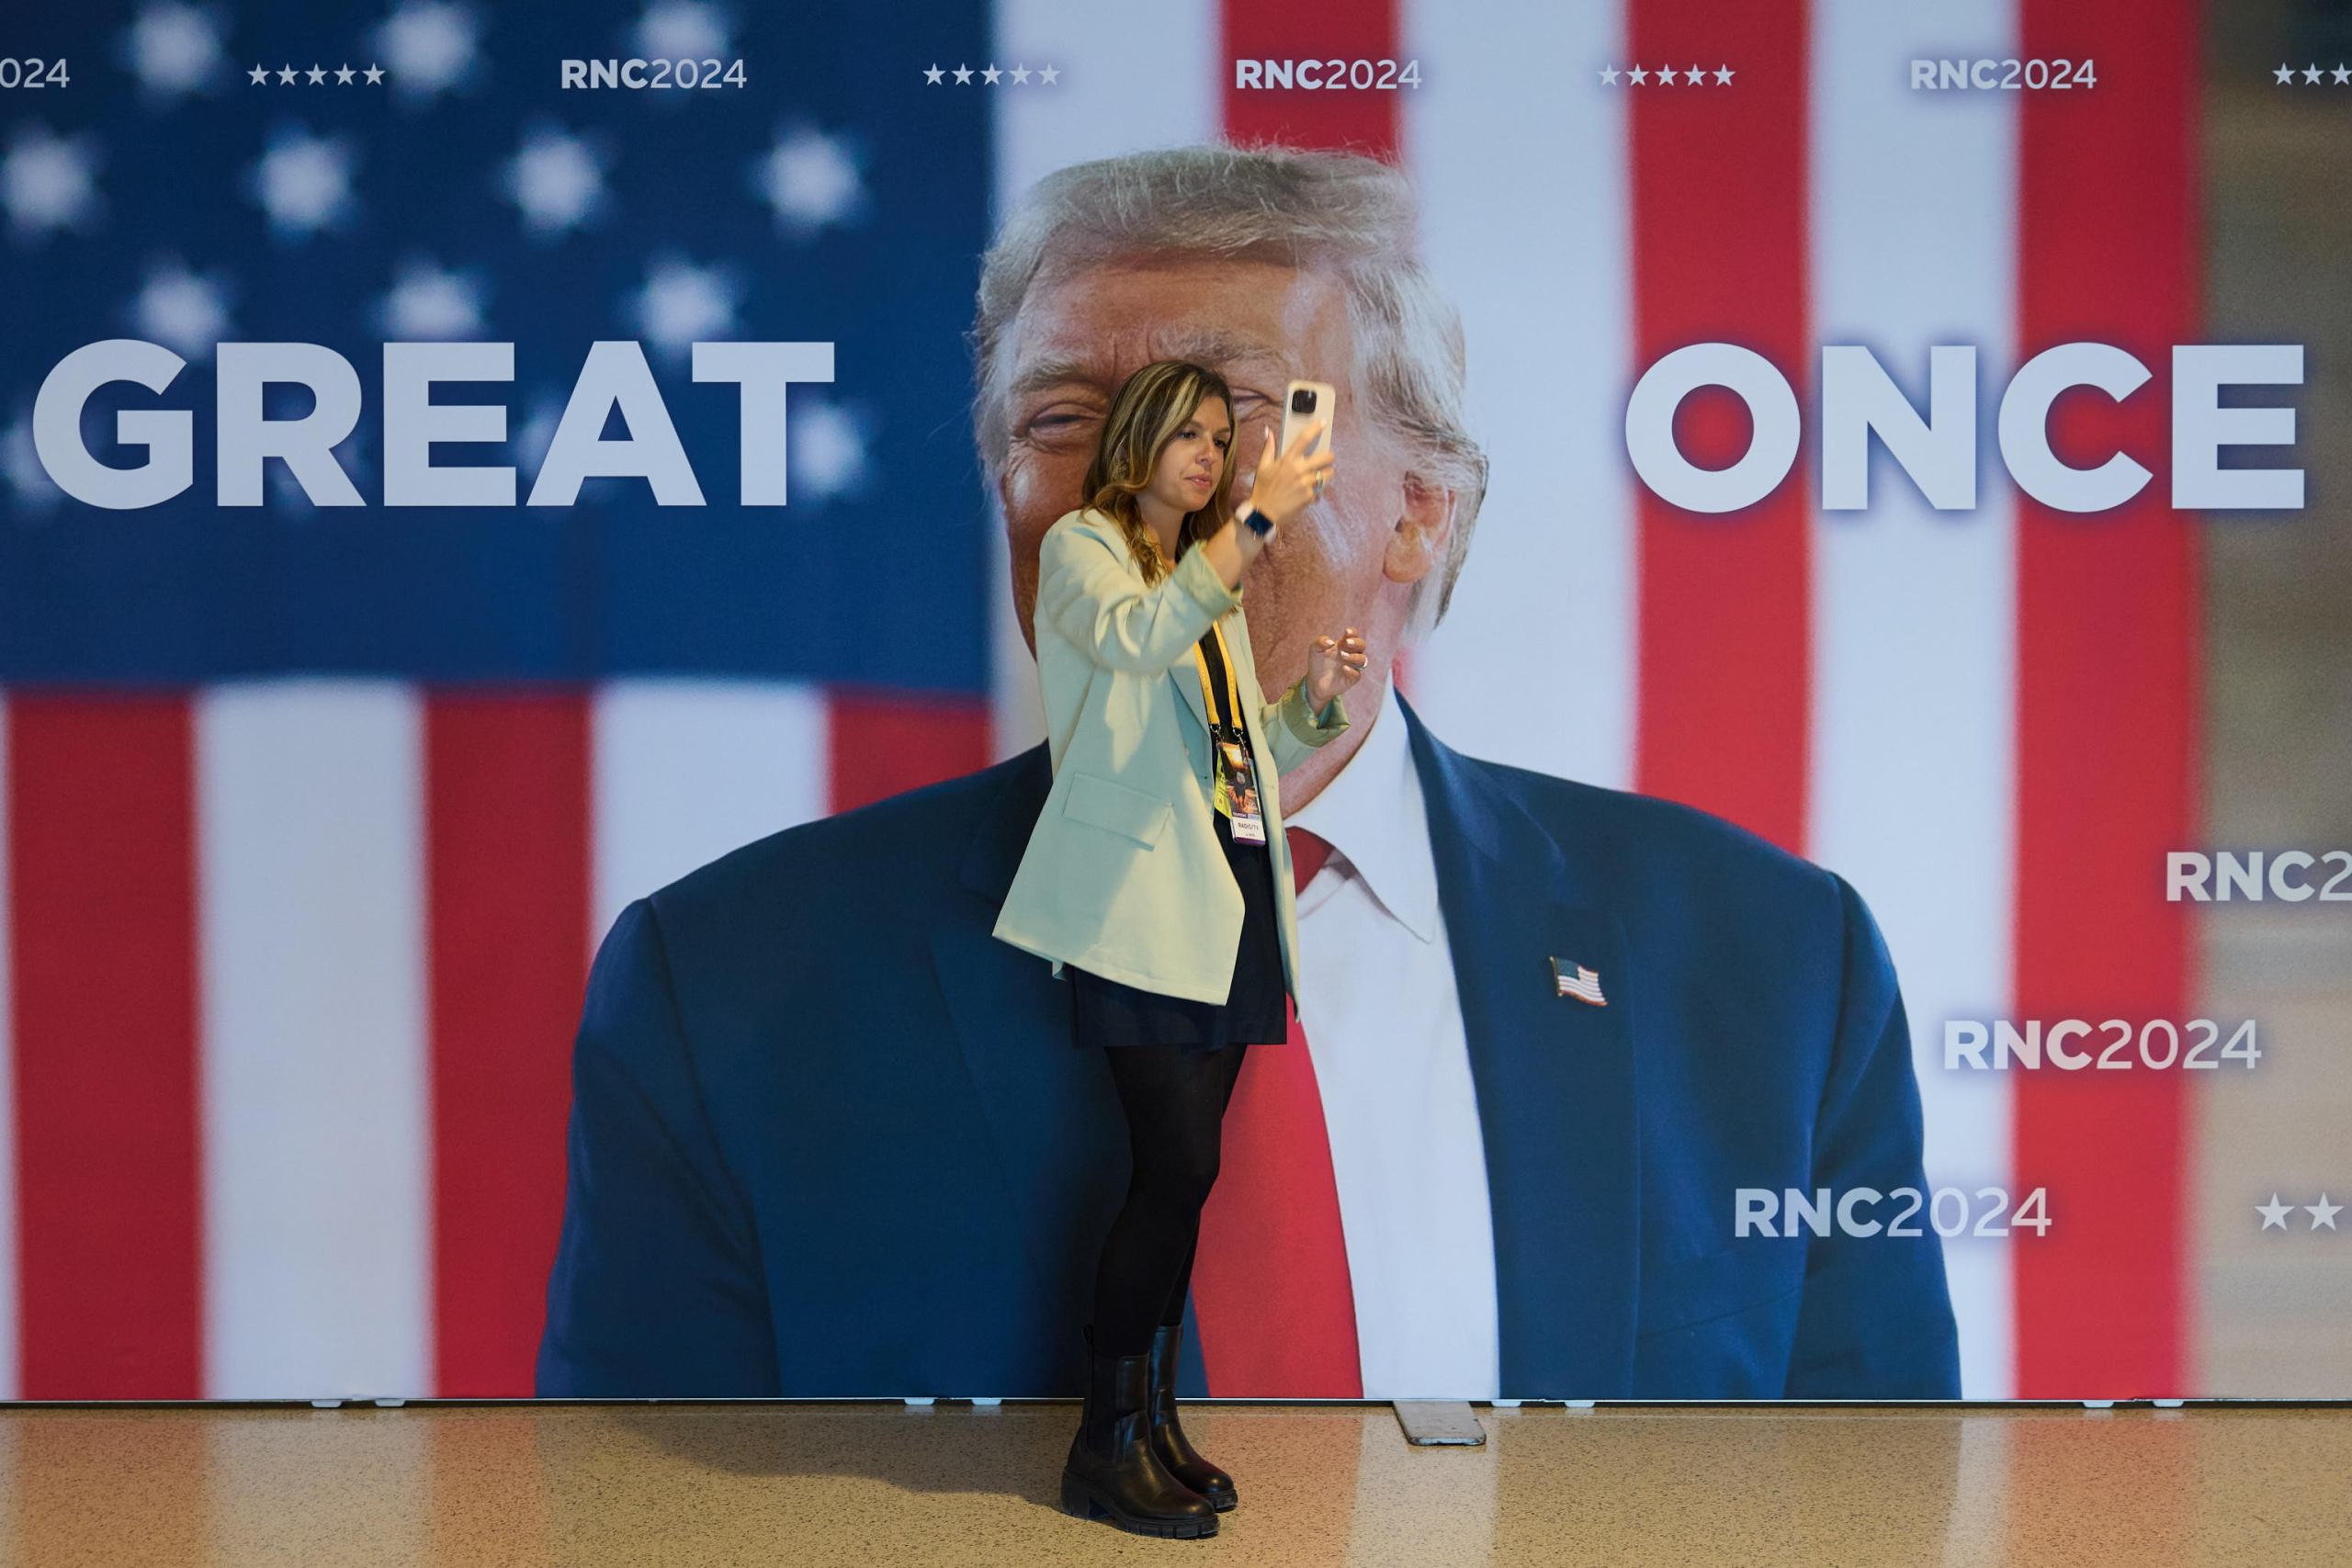 epa11486332 A woman takes a selfie with a poster of Republican presidential nominee and former President Donald Trump on the fourth day of the Republican National Convention (RNC) at Fiserv Forum in Milwaukee, Wisconsin, USA, 18 July 2024. The convention comes days after a 20-year-old Pennsylvania man attempted to assassinate former president and current Republican presidential nominee Donald Trump. The 2024 Republican National Convention is being held 15 to 18 July 2024 in which delegates of the United States Republican Party select the party's nominees for president and vice president in the 2024 United States presidential election.  EPA/ALLISON DINNER